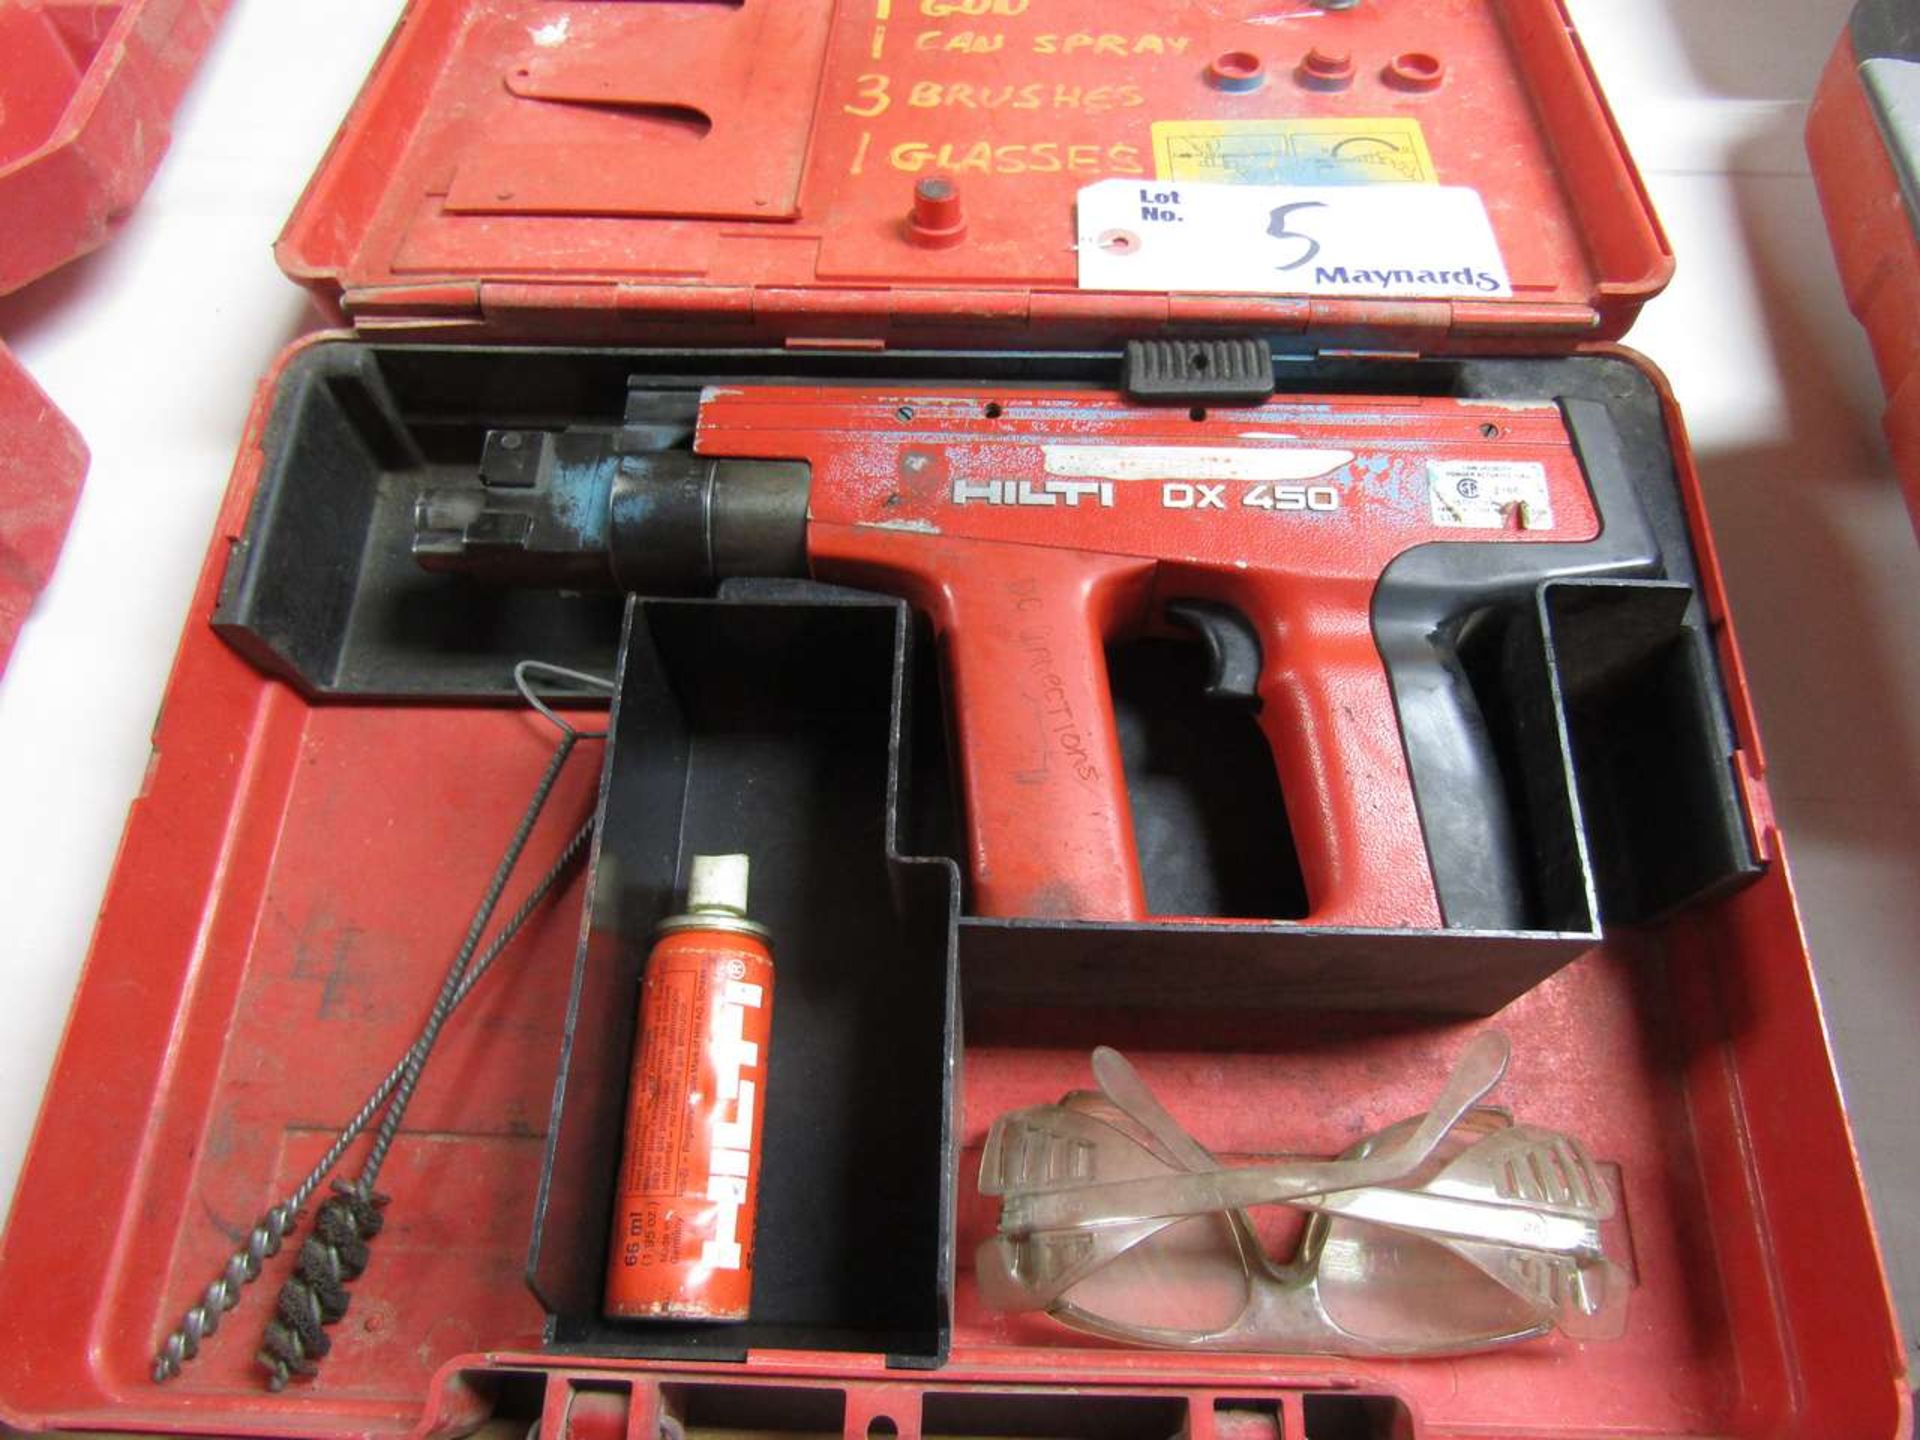 Hilti DX450 Powder Activated Tool